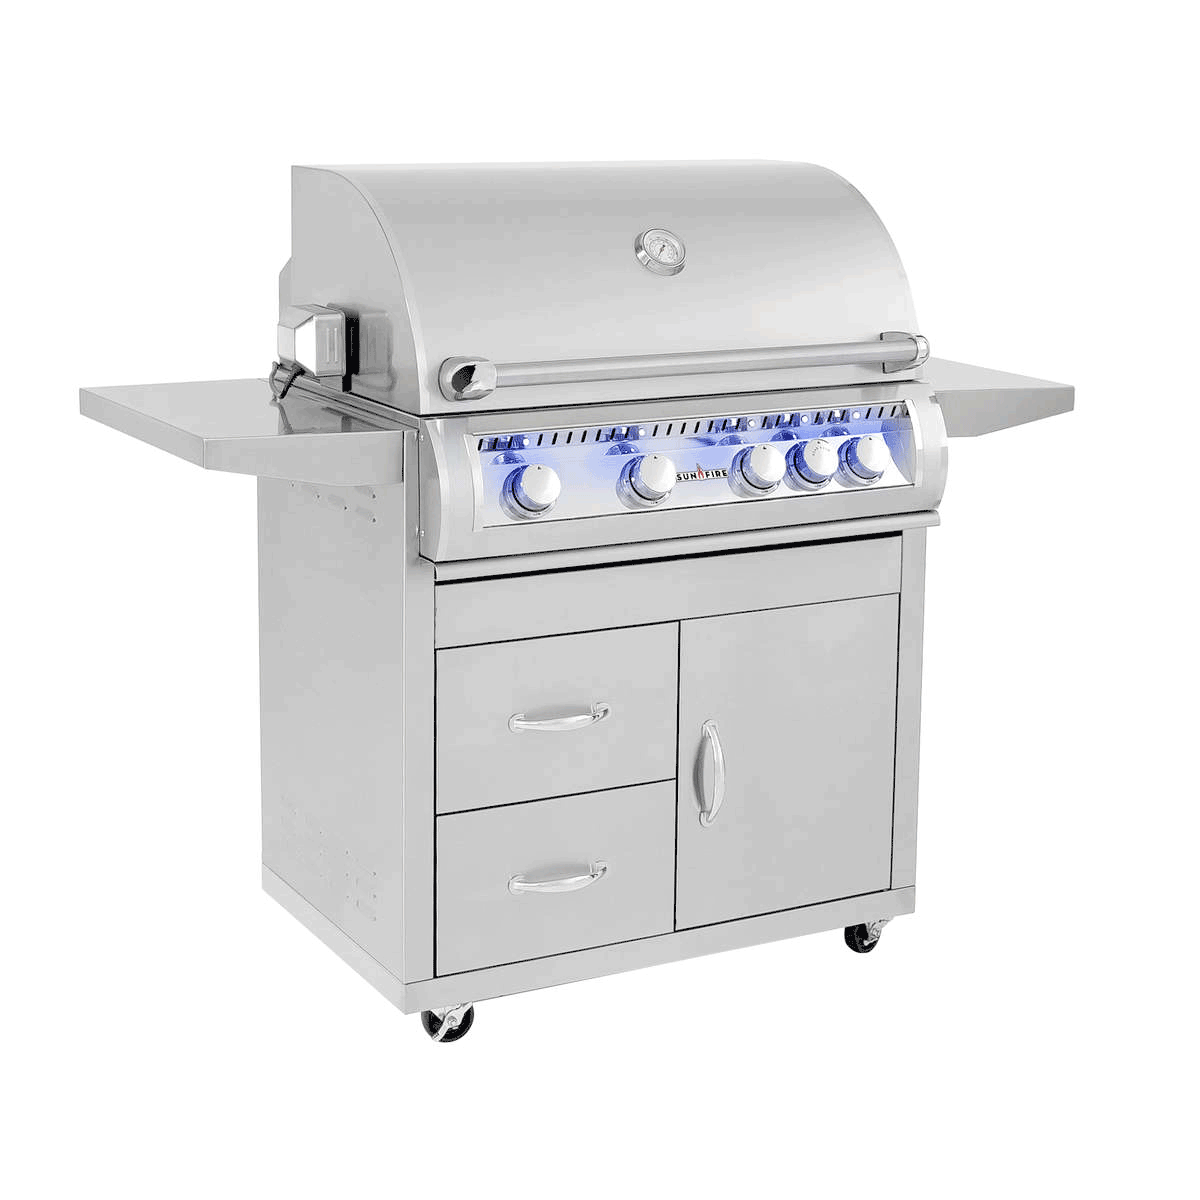 SunFire 32" Grill Deluxe Cart